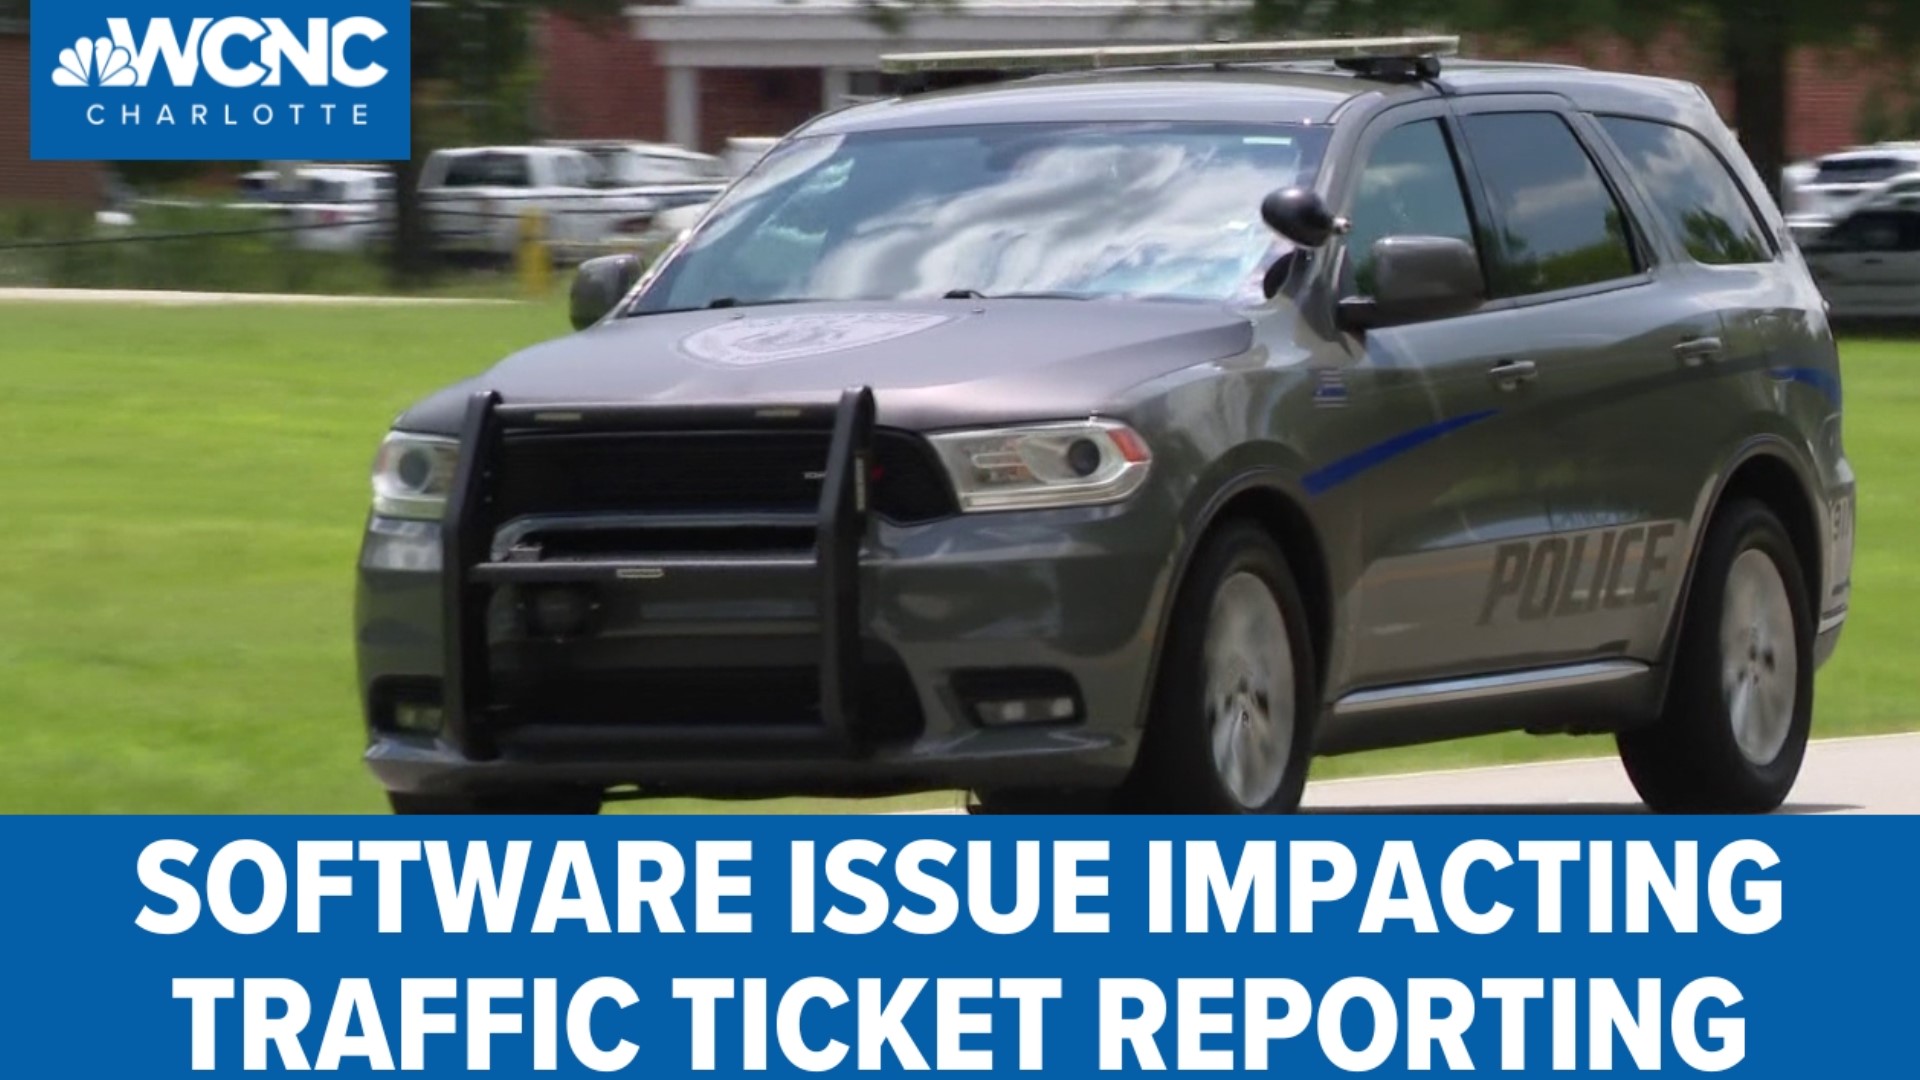 The city of Lancaster is working to resolve a software issue impacting hundreds of traffic tickets